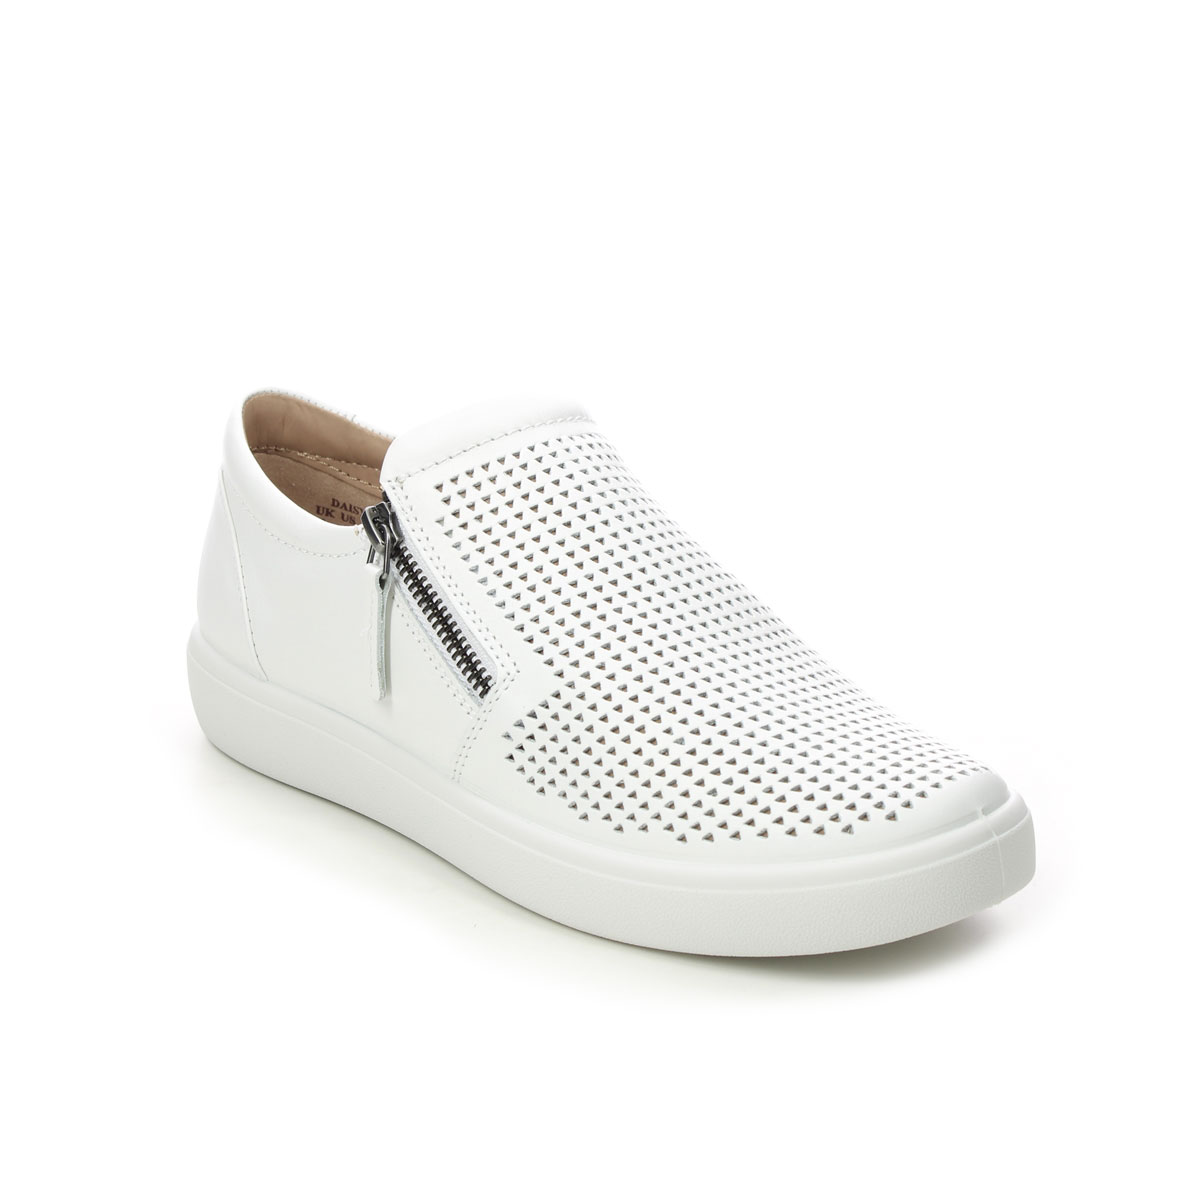 Hotter Daisy Wide White Leather Womens Comfort Slip On Shoes 16212-61 in a Plain Leather in Size 4